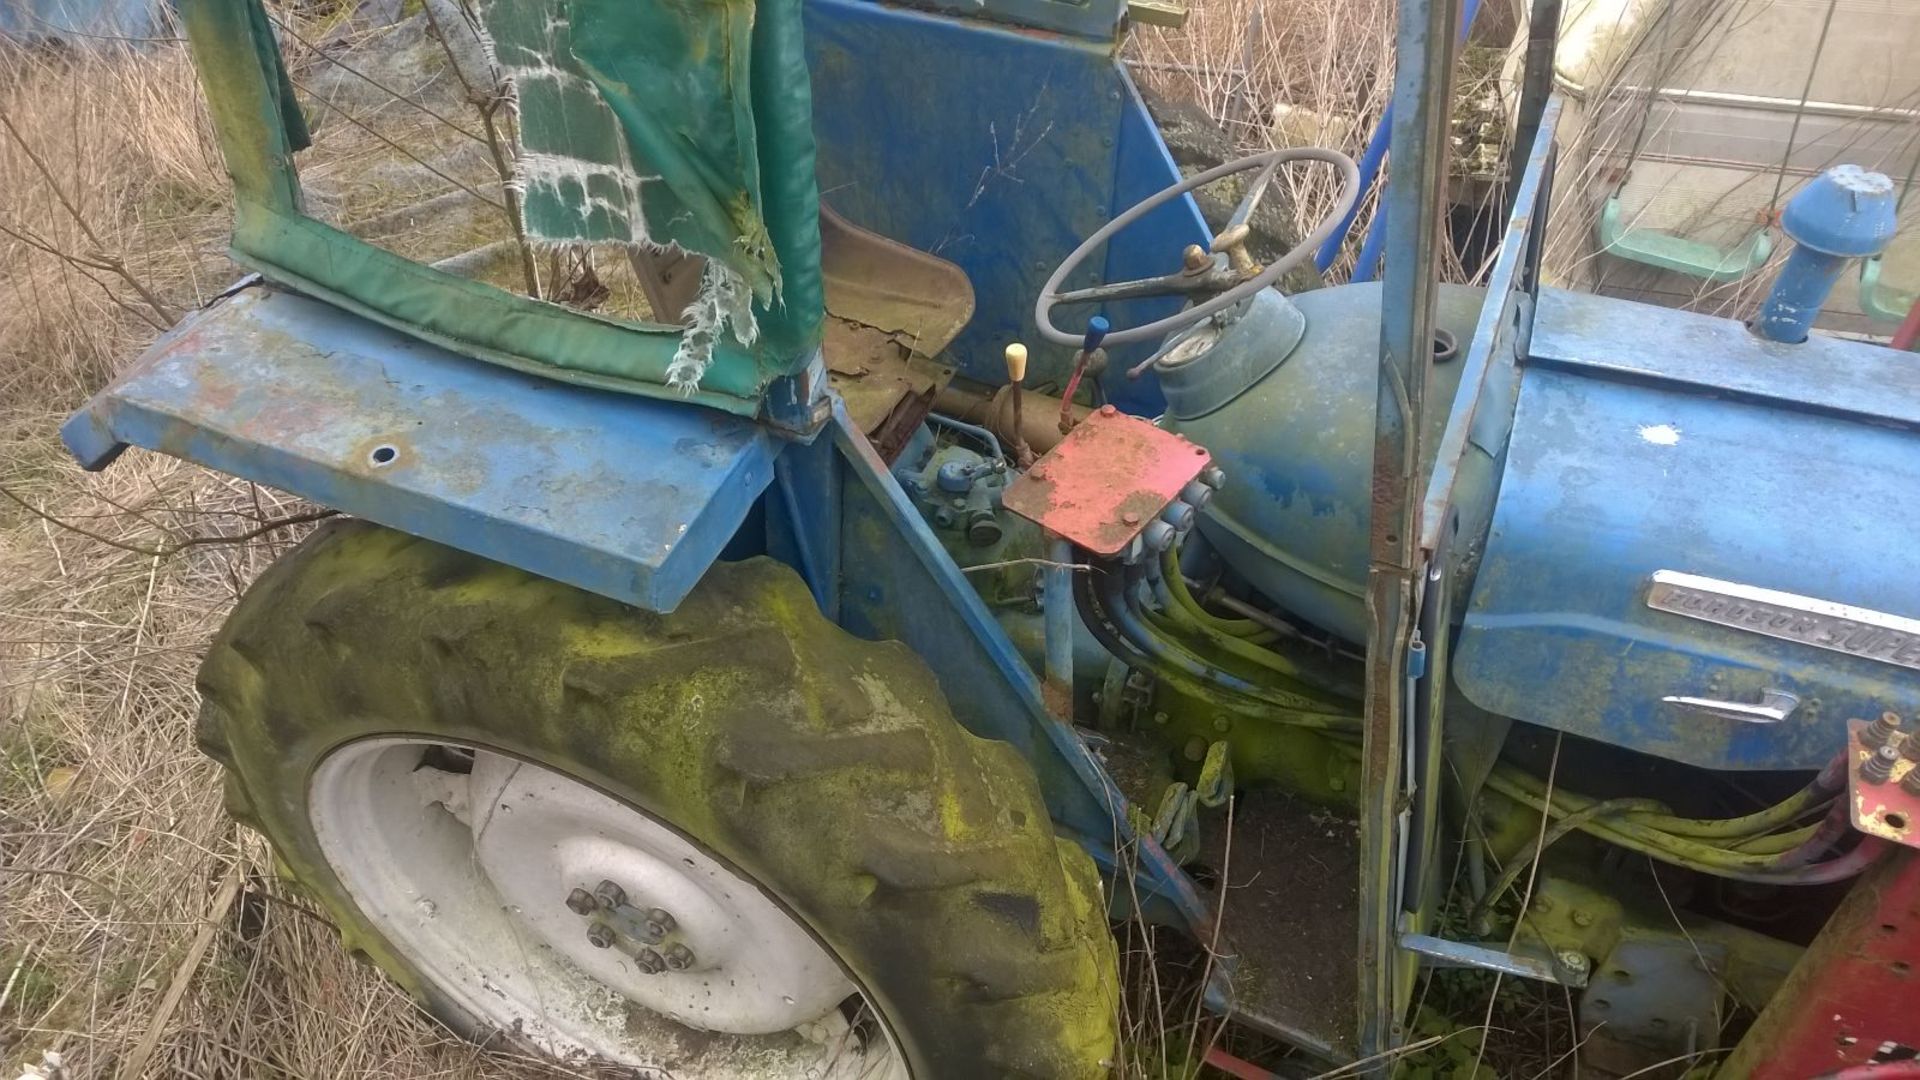 FORDSON  SUPER MAJOR c/w POWER LOADER   WE HAVENT HEARD IT RUNNING YET BUT WE ARE INTENDING TO GET - Image 12 of 20